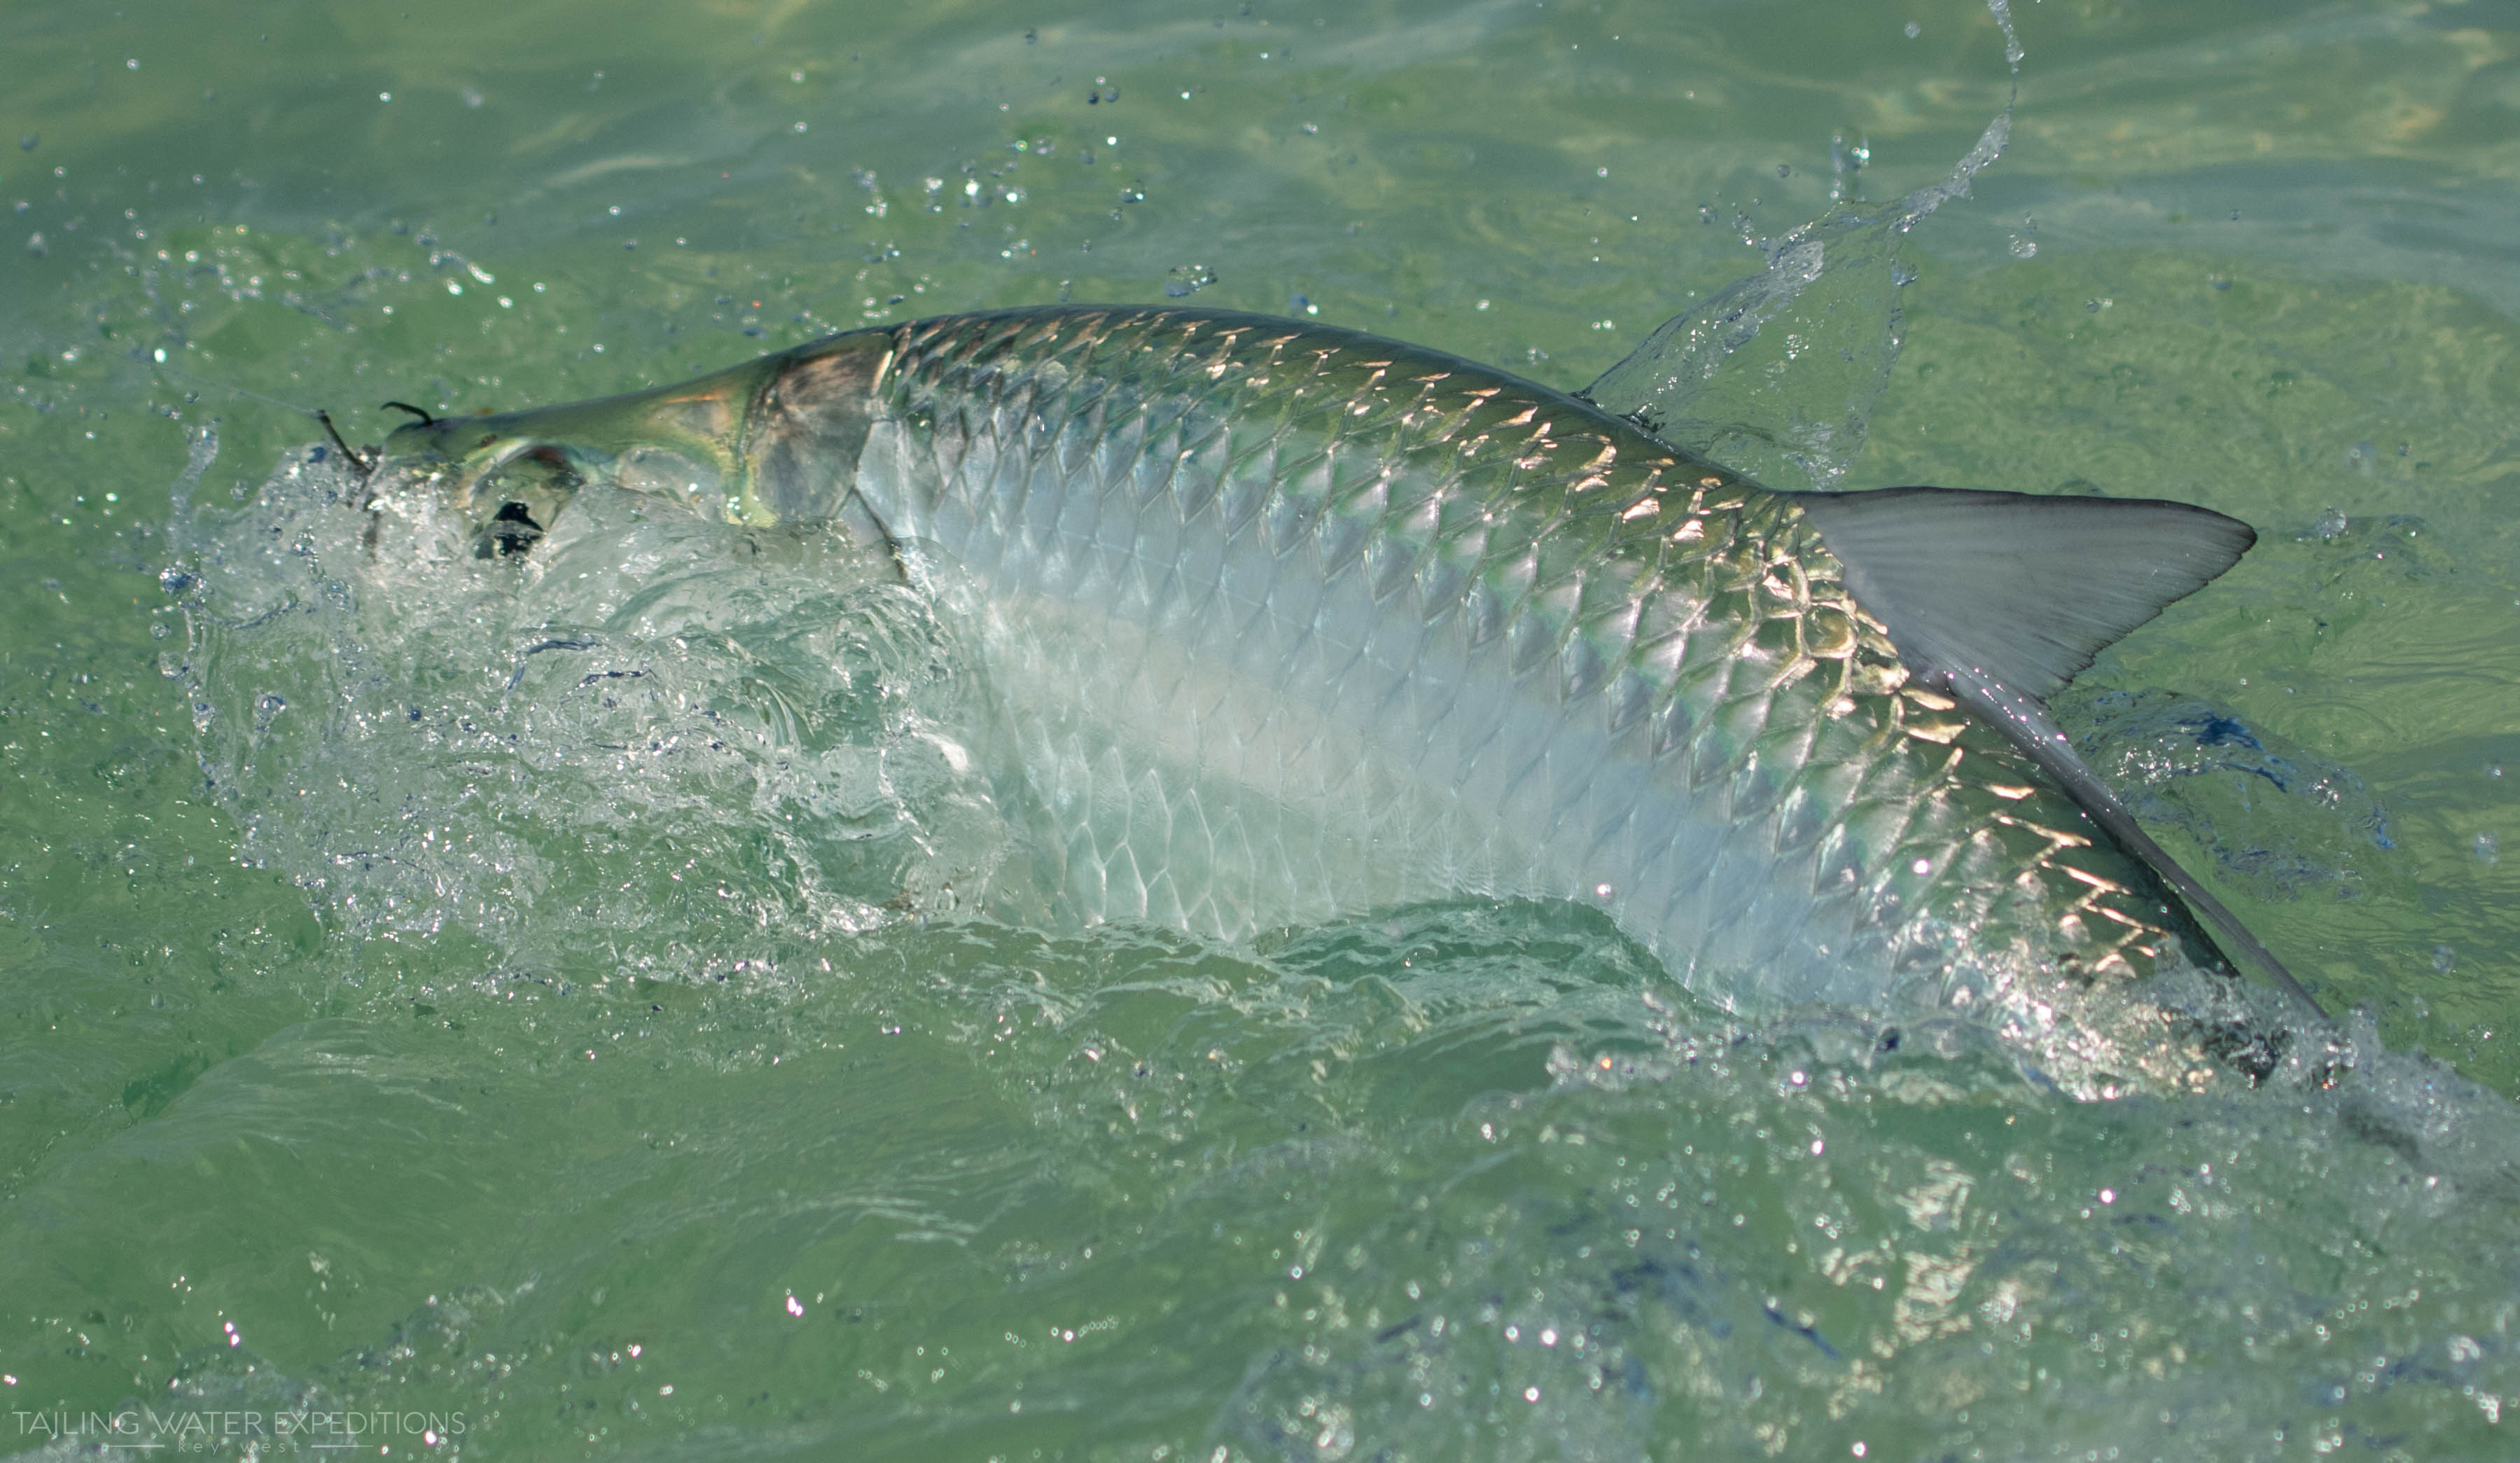 This nice tarpon makes on more run before it is landed.